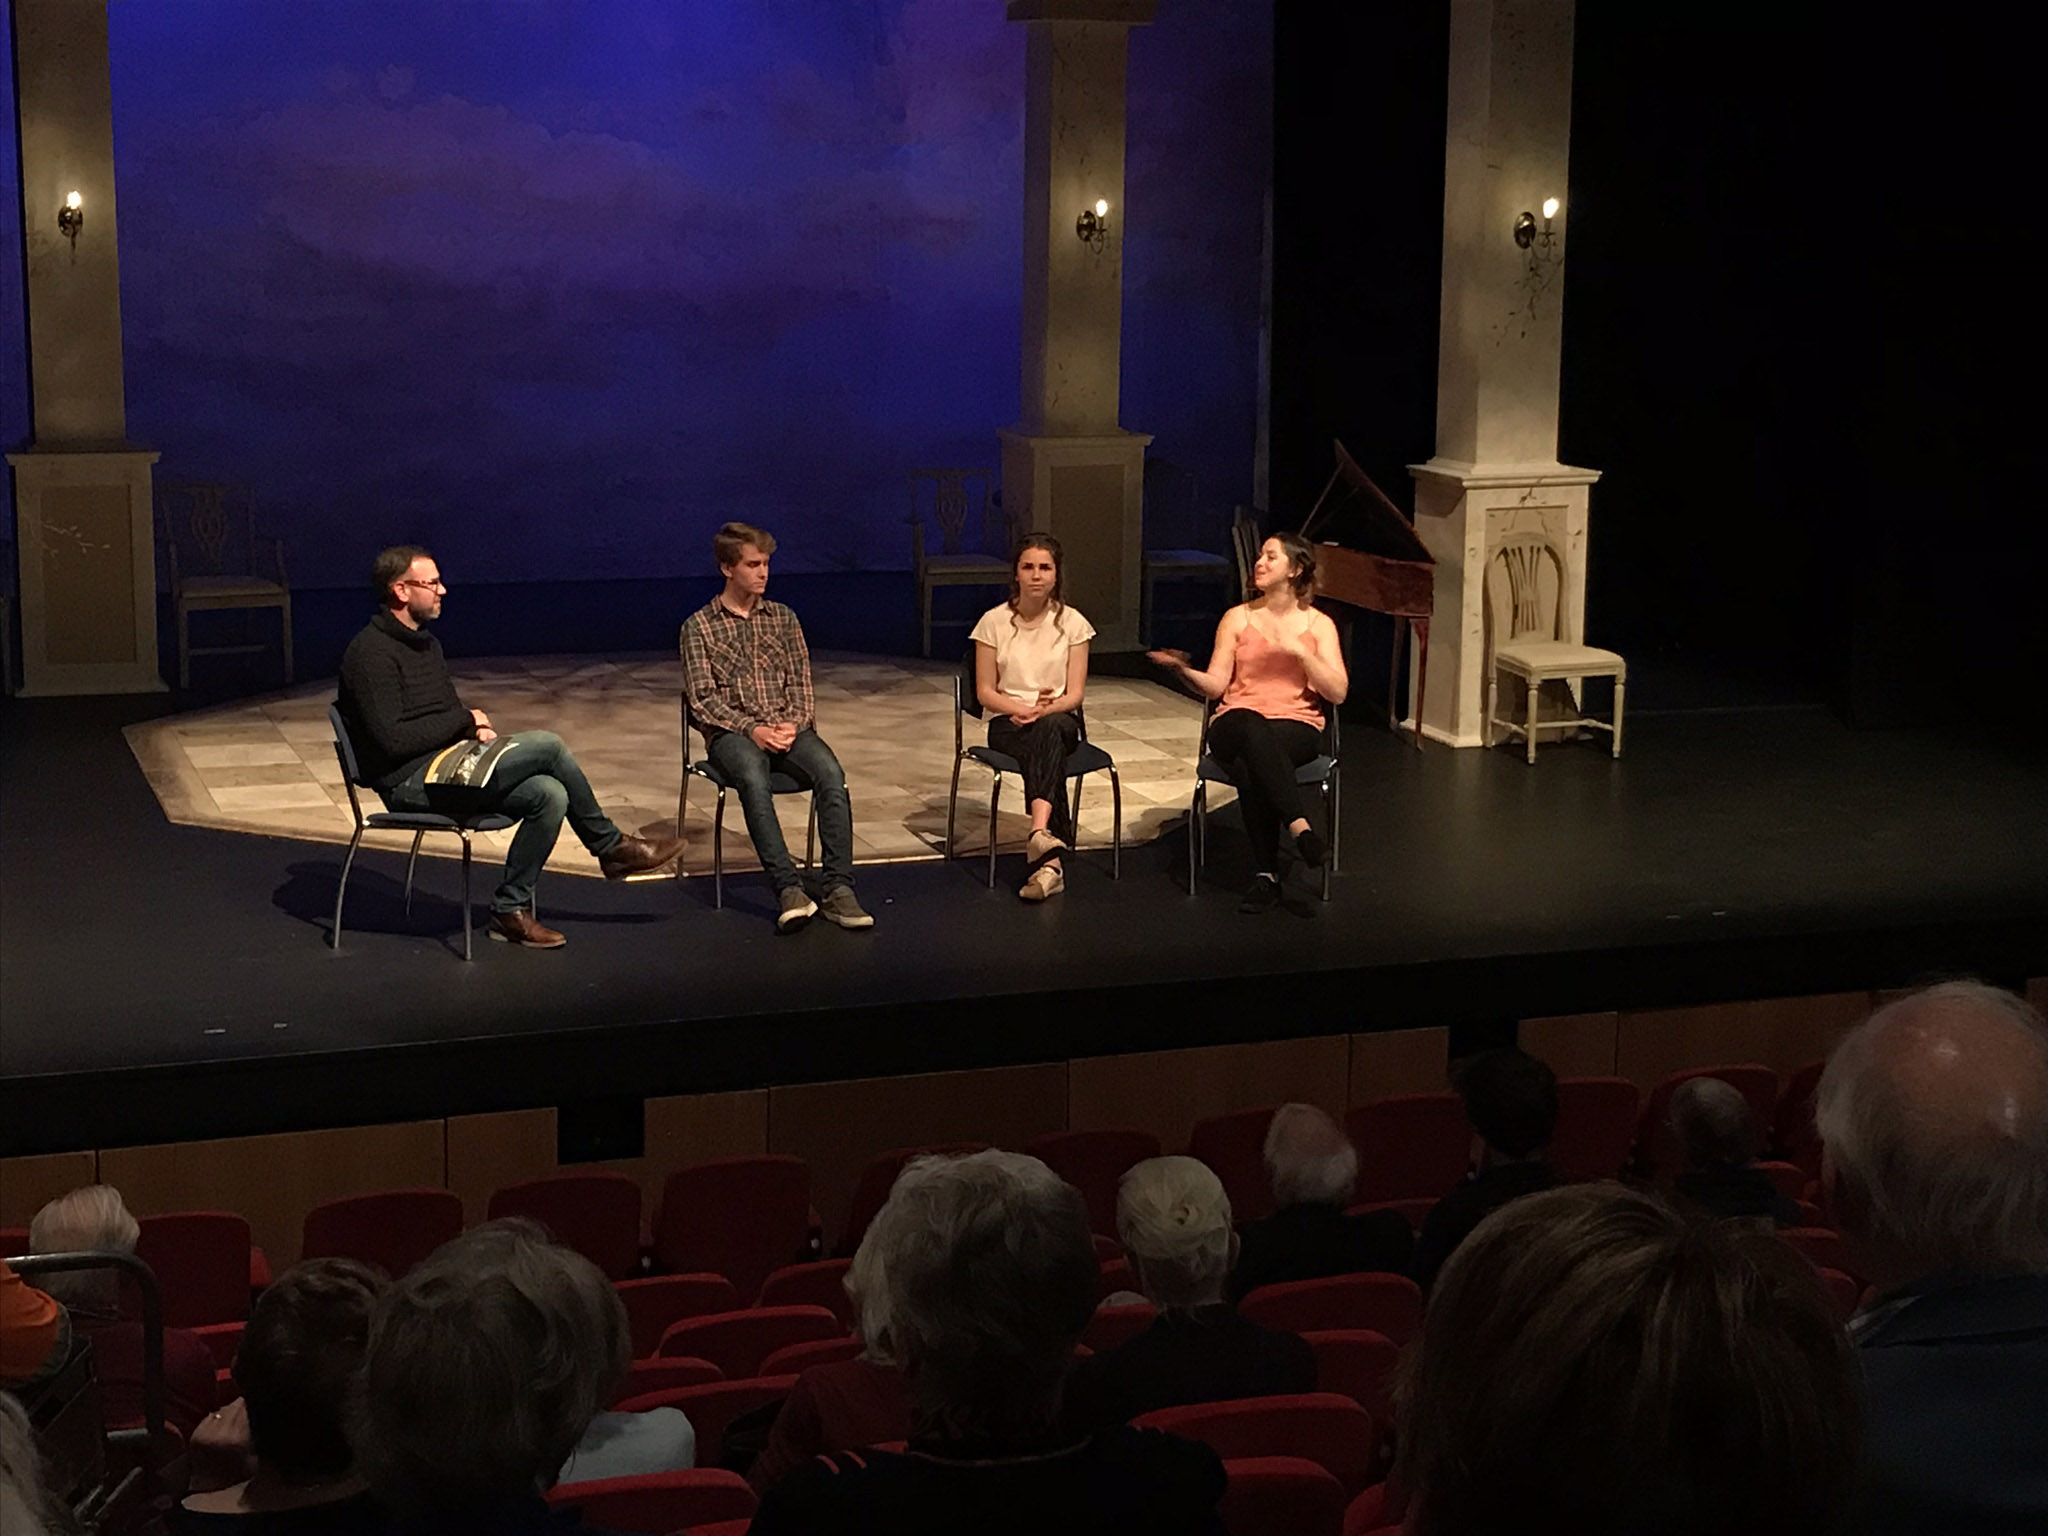 Image shows four people sitting on a stage talking to the audience in a theatre